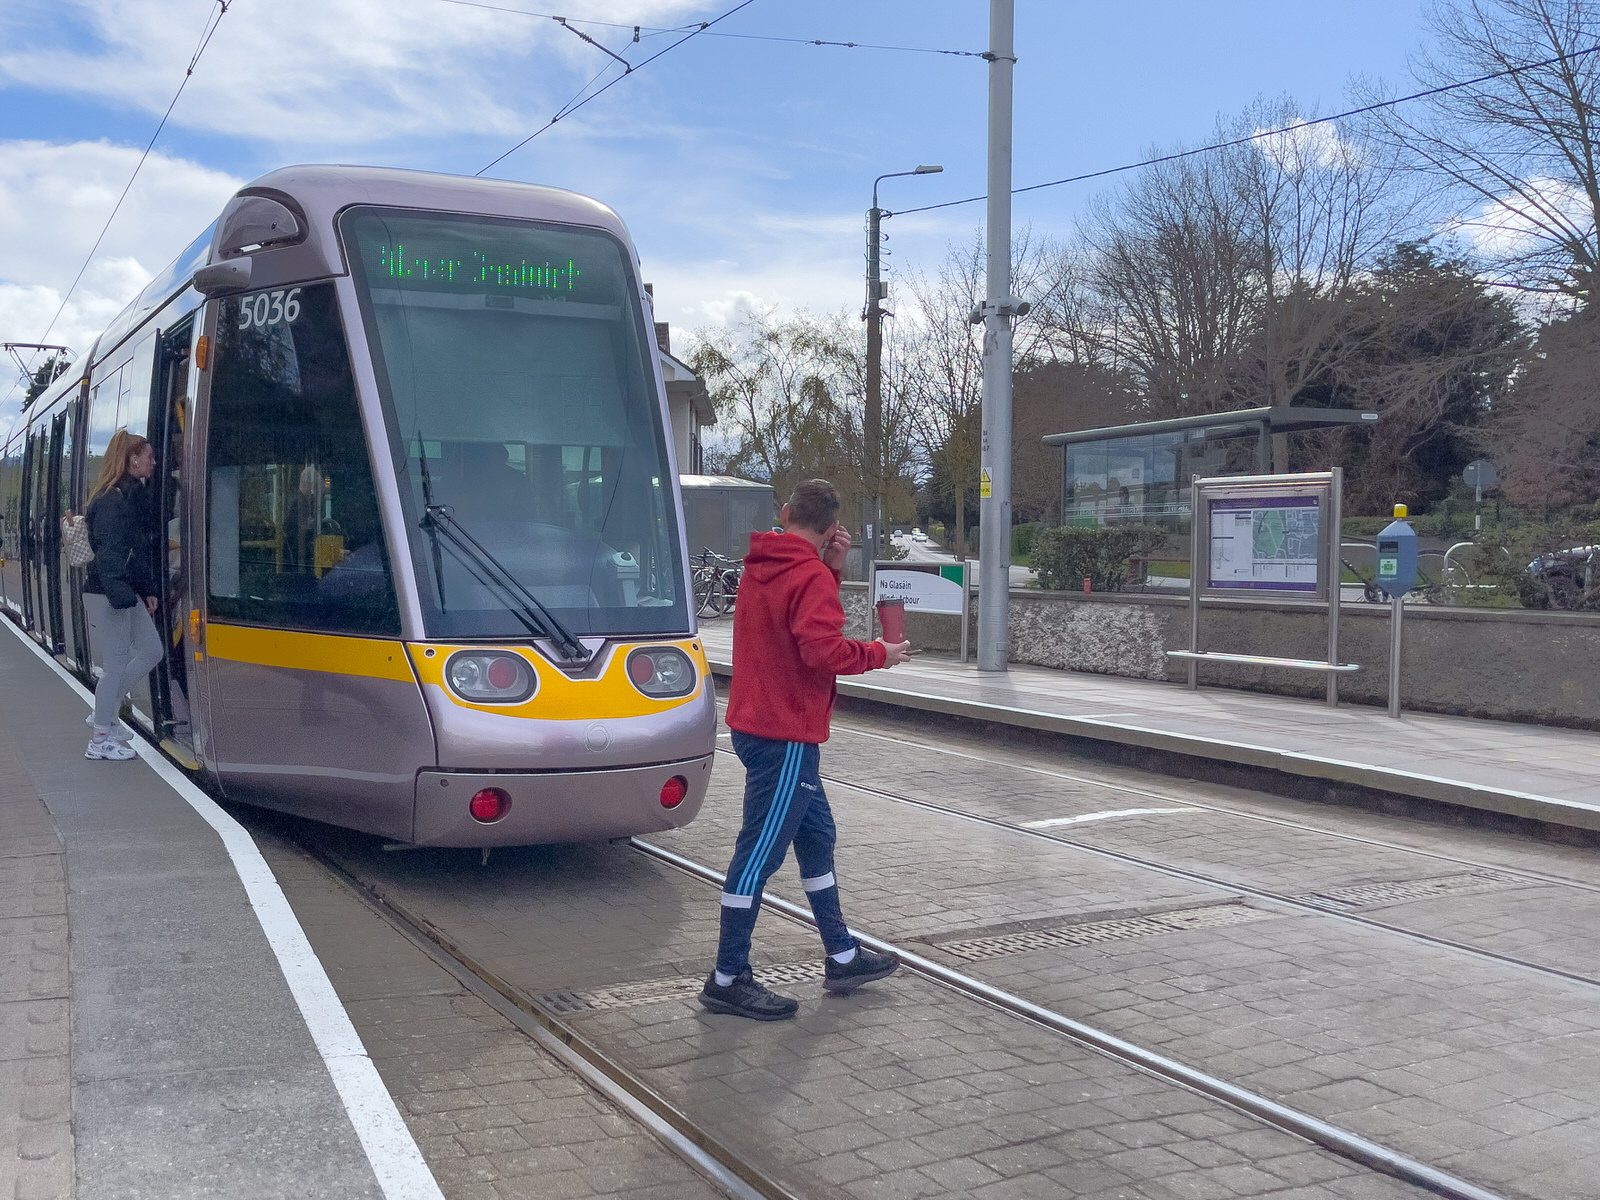 THE LUAS TRAM STOP AT WINDY ARBOUR AND THE IMMEDIATE AREA 010